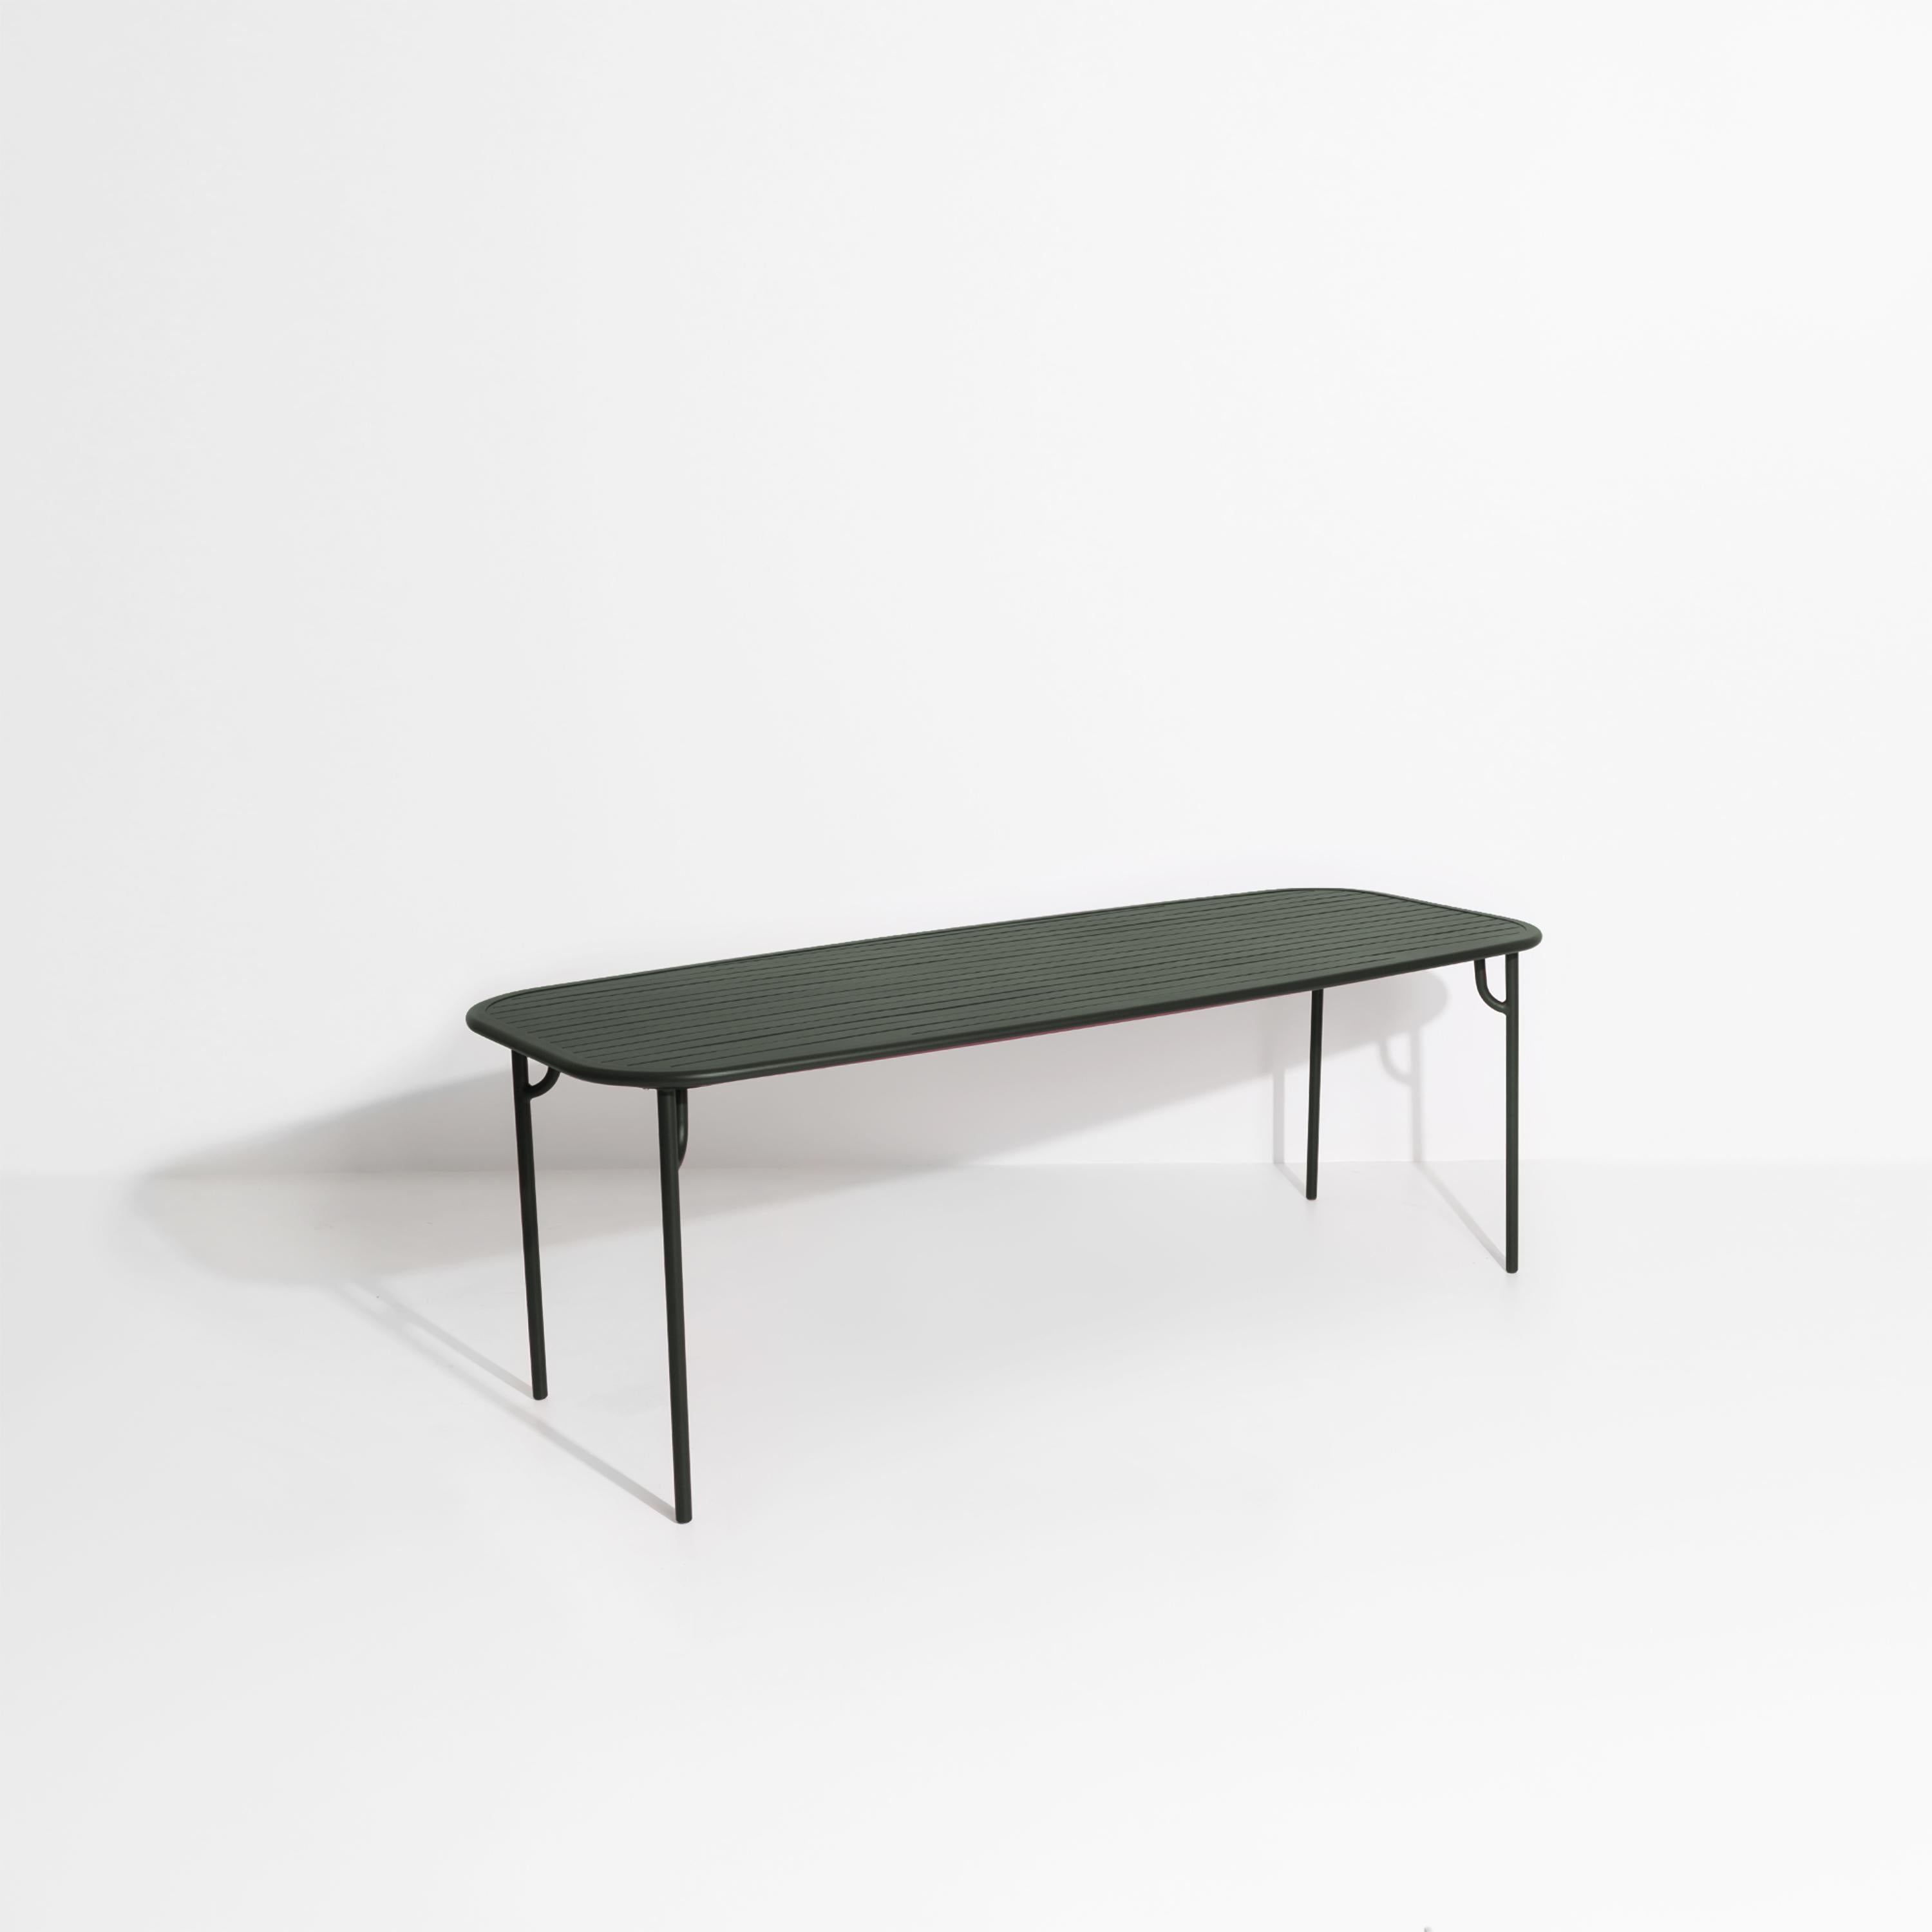 Petite Friture Week-End Large Rectangular Dining Table in Glass Green Aluminium with Slats by Studio BrichetZiegler, 2017

The week-end collection is a full range of outdoor furniture, in aluminium grained epoxy paint, matt finish, that includes